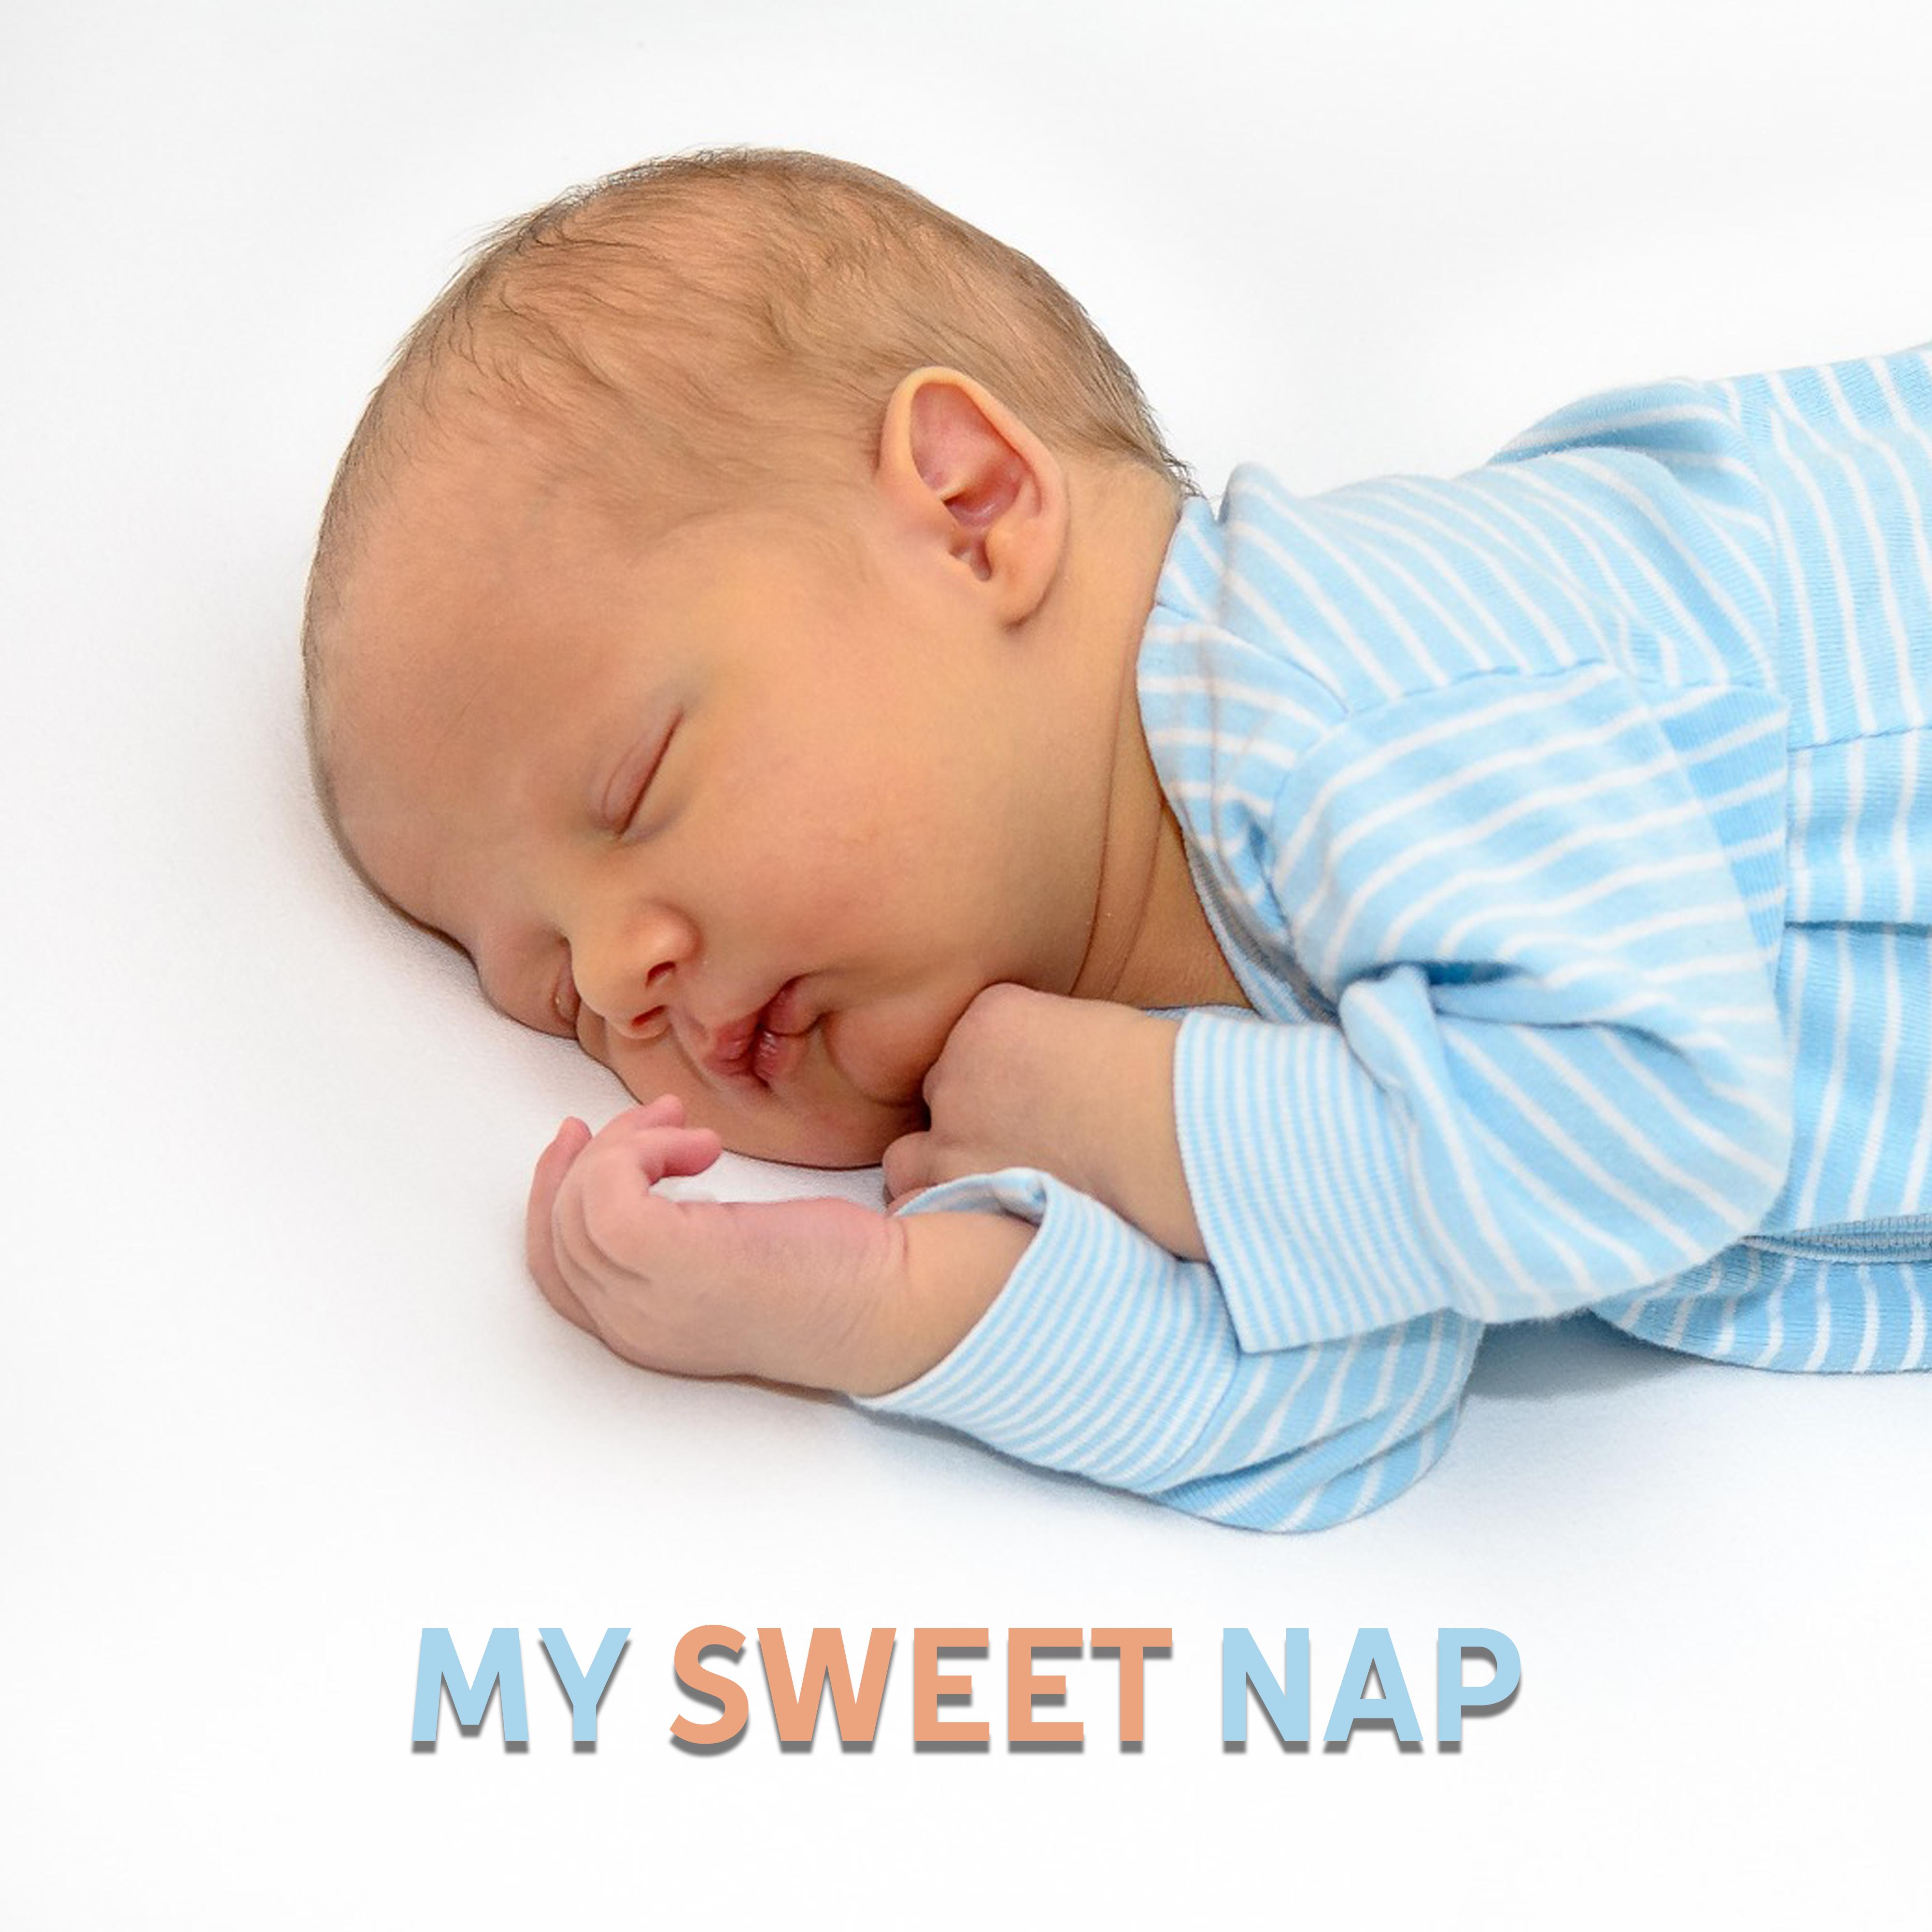 My Sweet Nap  Relaxing Melodies to Bed, Music to Pillow, Baby Lullaby, Inner Calmness, Soothing Sounds for Baby, Healing Lullaby